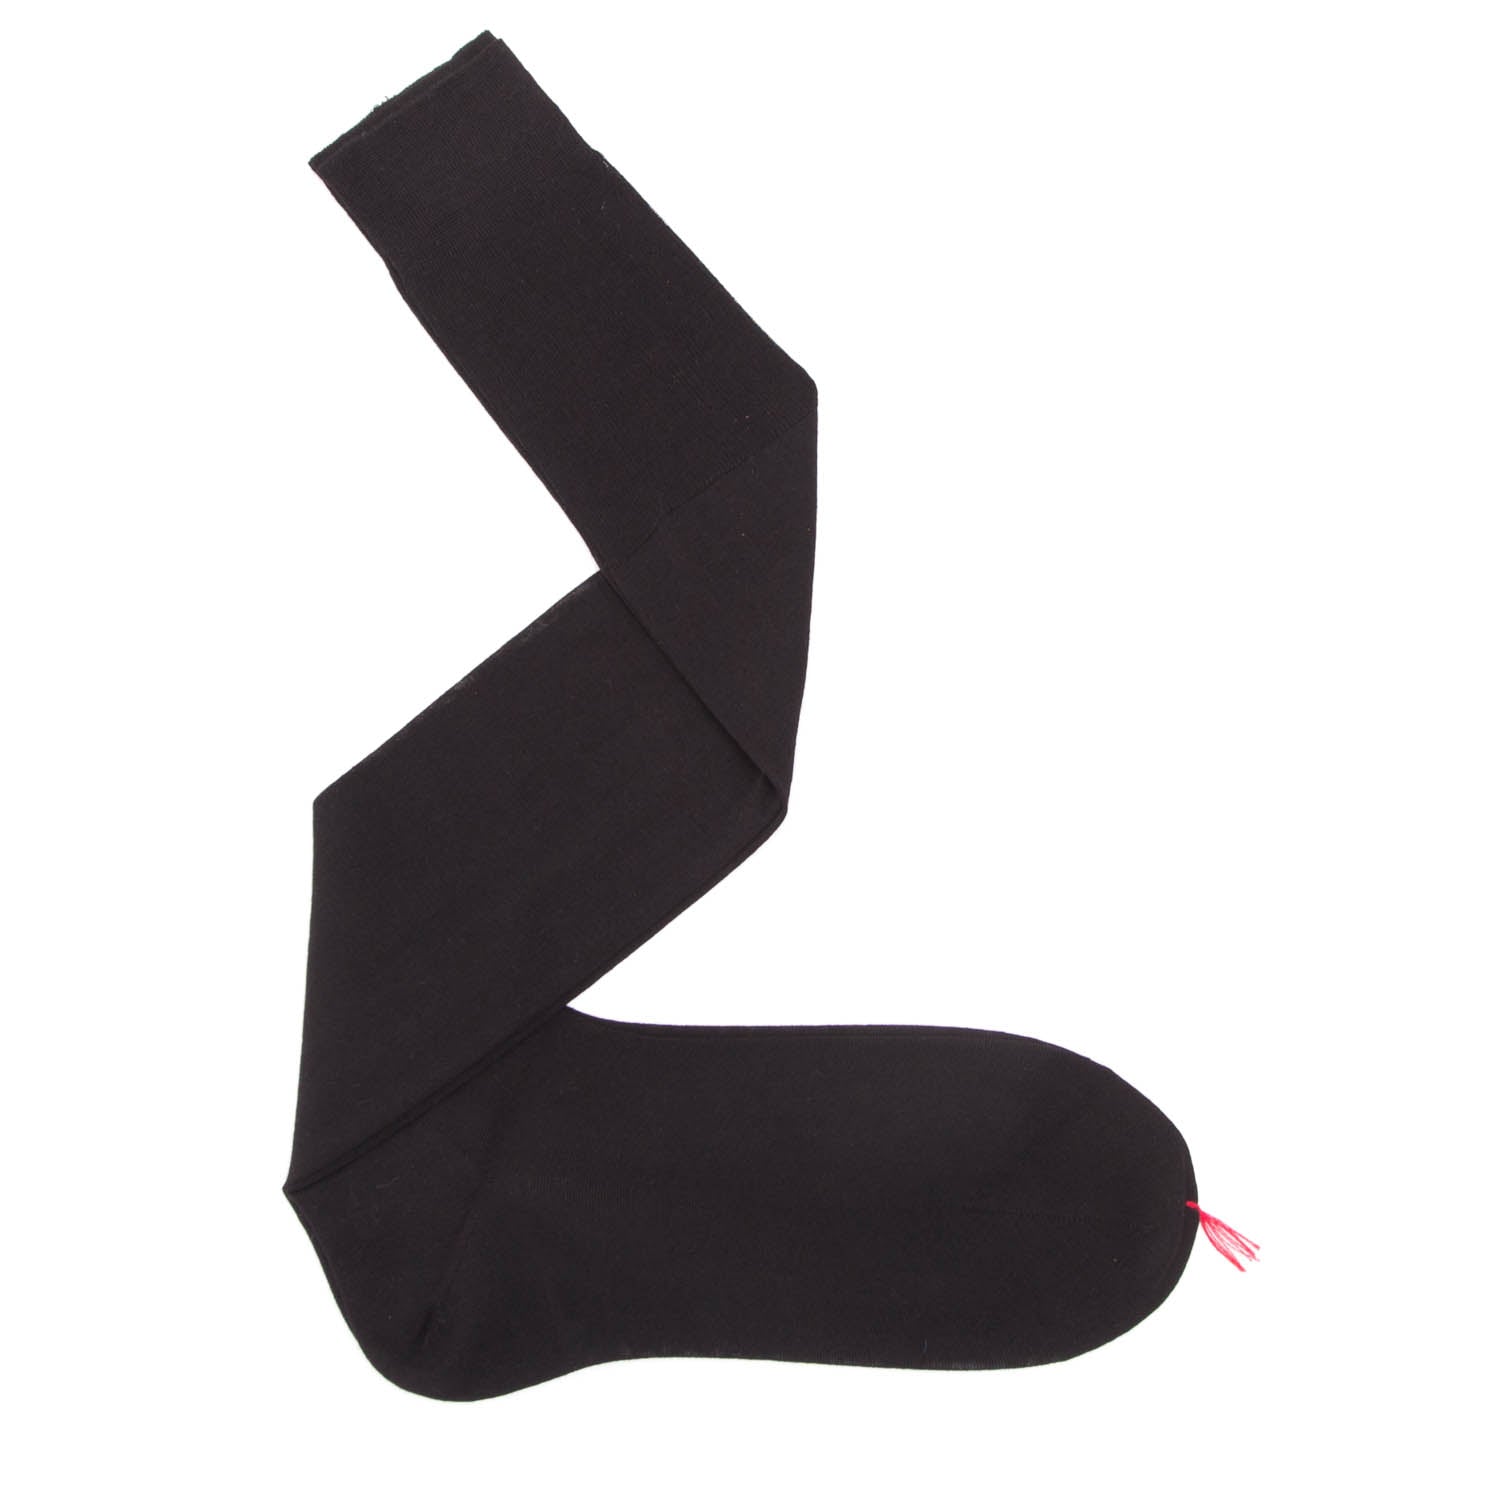 A pair of black Sovereign Grade Solid Wool-Silk Dress Socks by KirbyAllison.com on a white background.